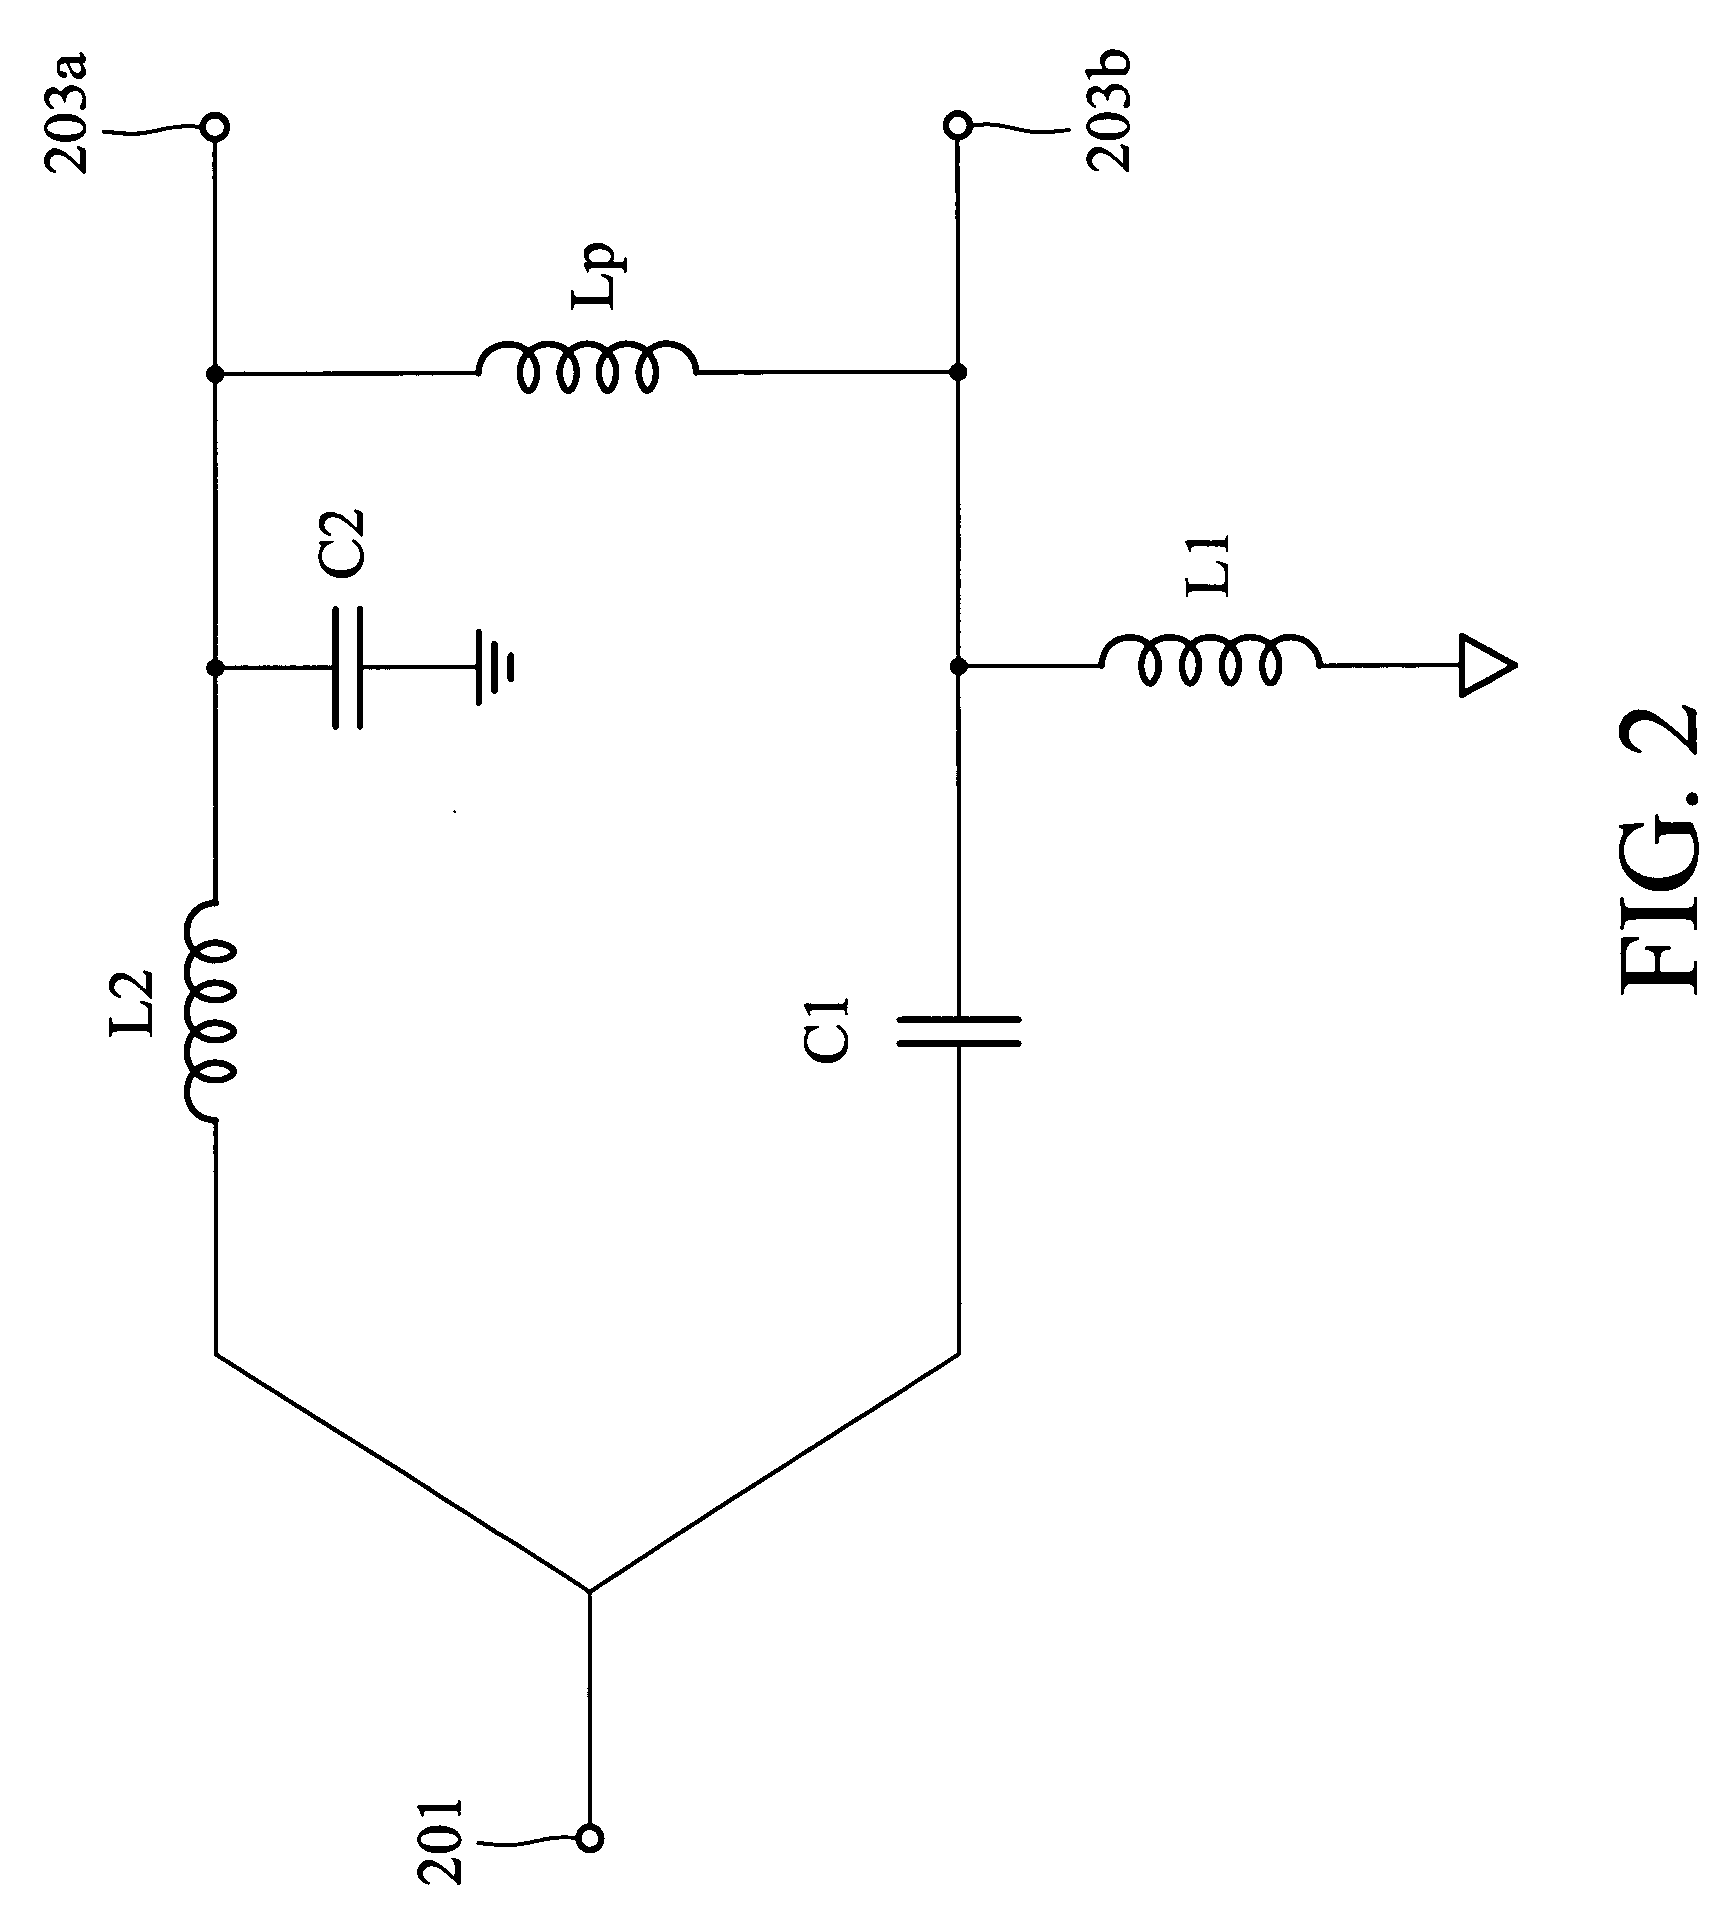 Circuit system for wireless communications